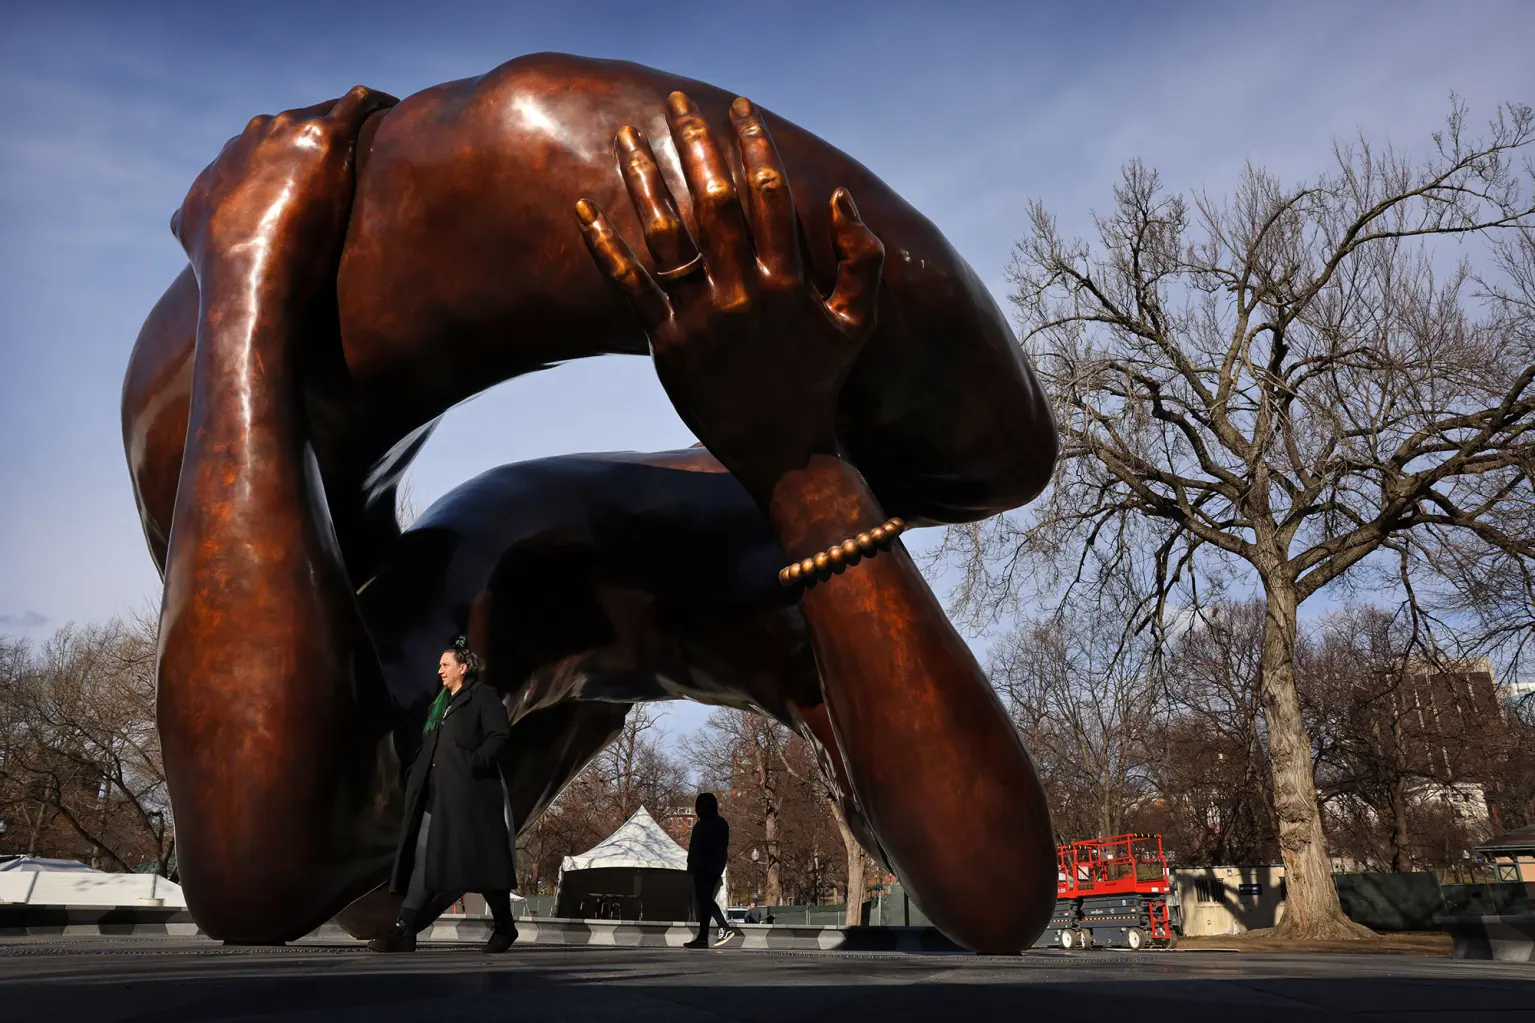 “Looks More Like a Pair of Hands Hugging a Beefy Penis” – MLK’s Family Member Slams Obscene Boston Statue in His Honor